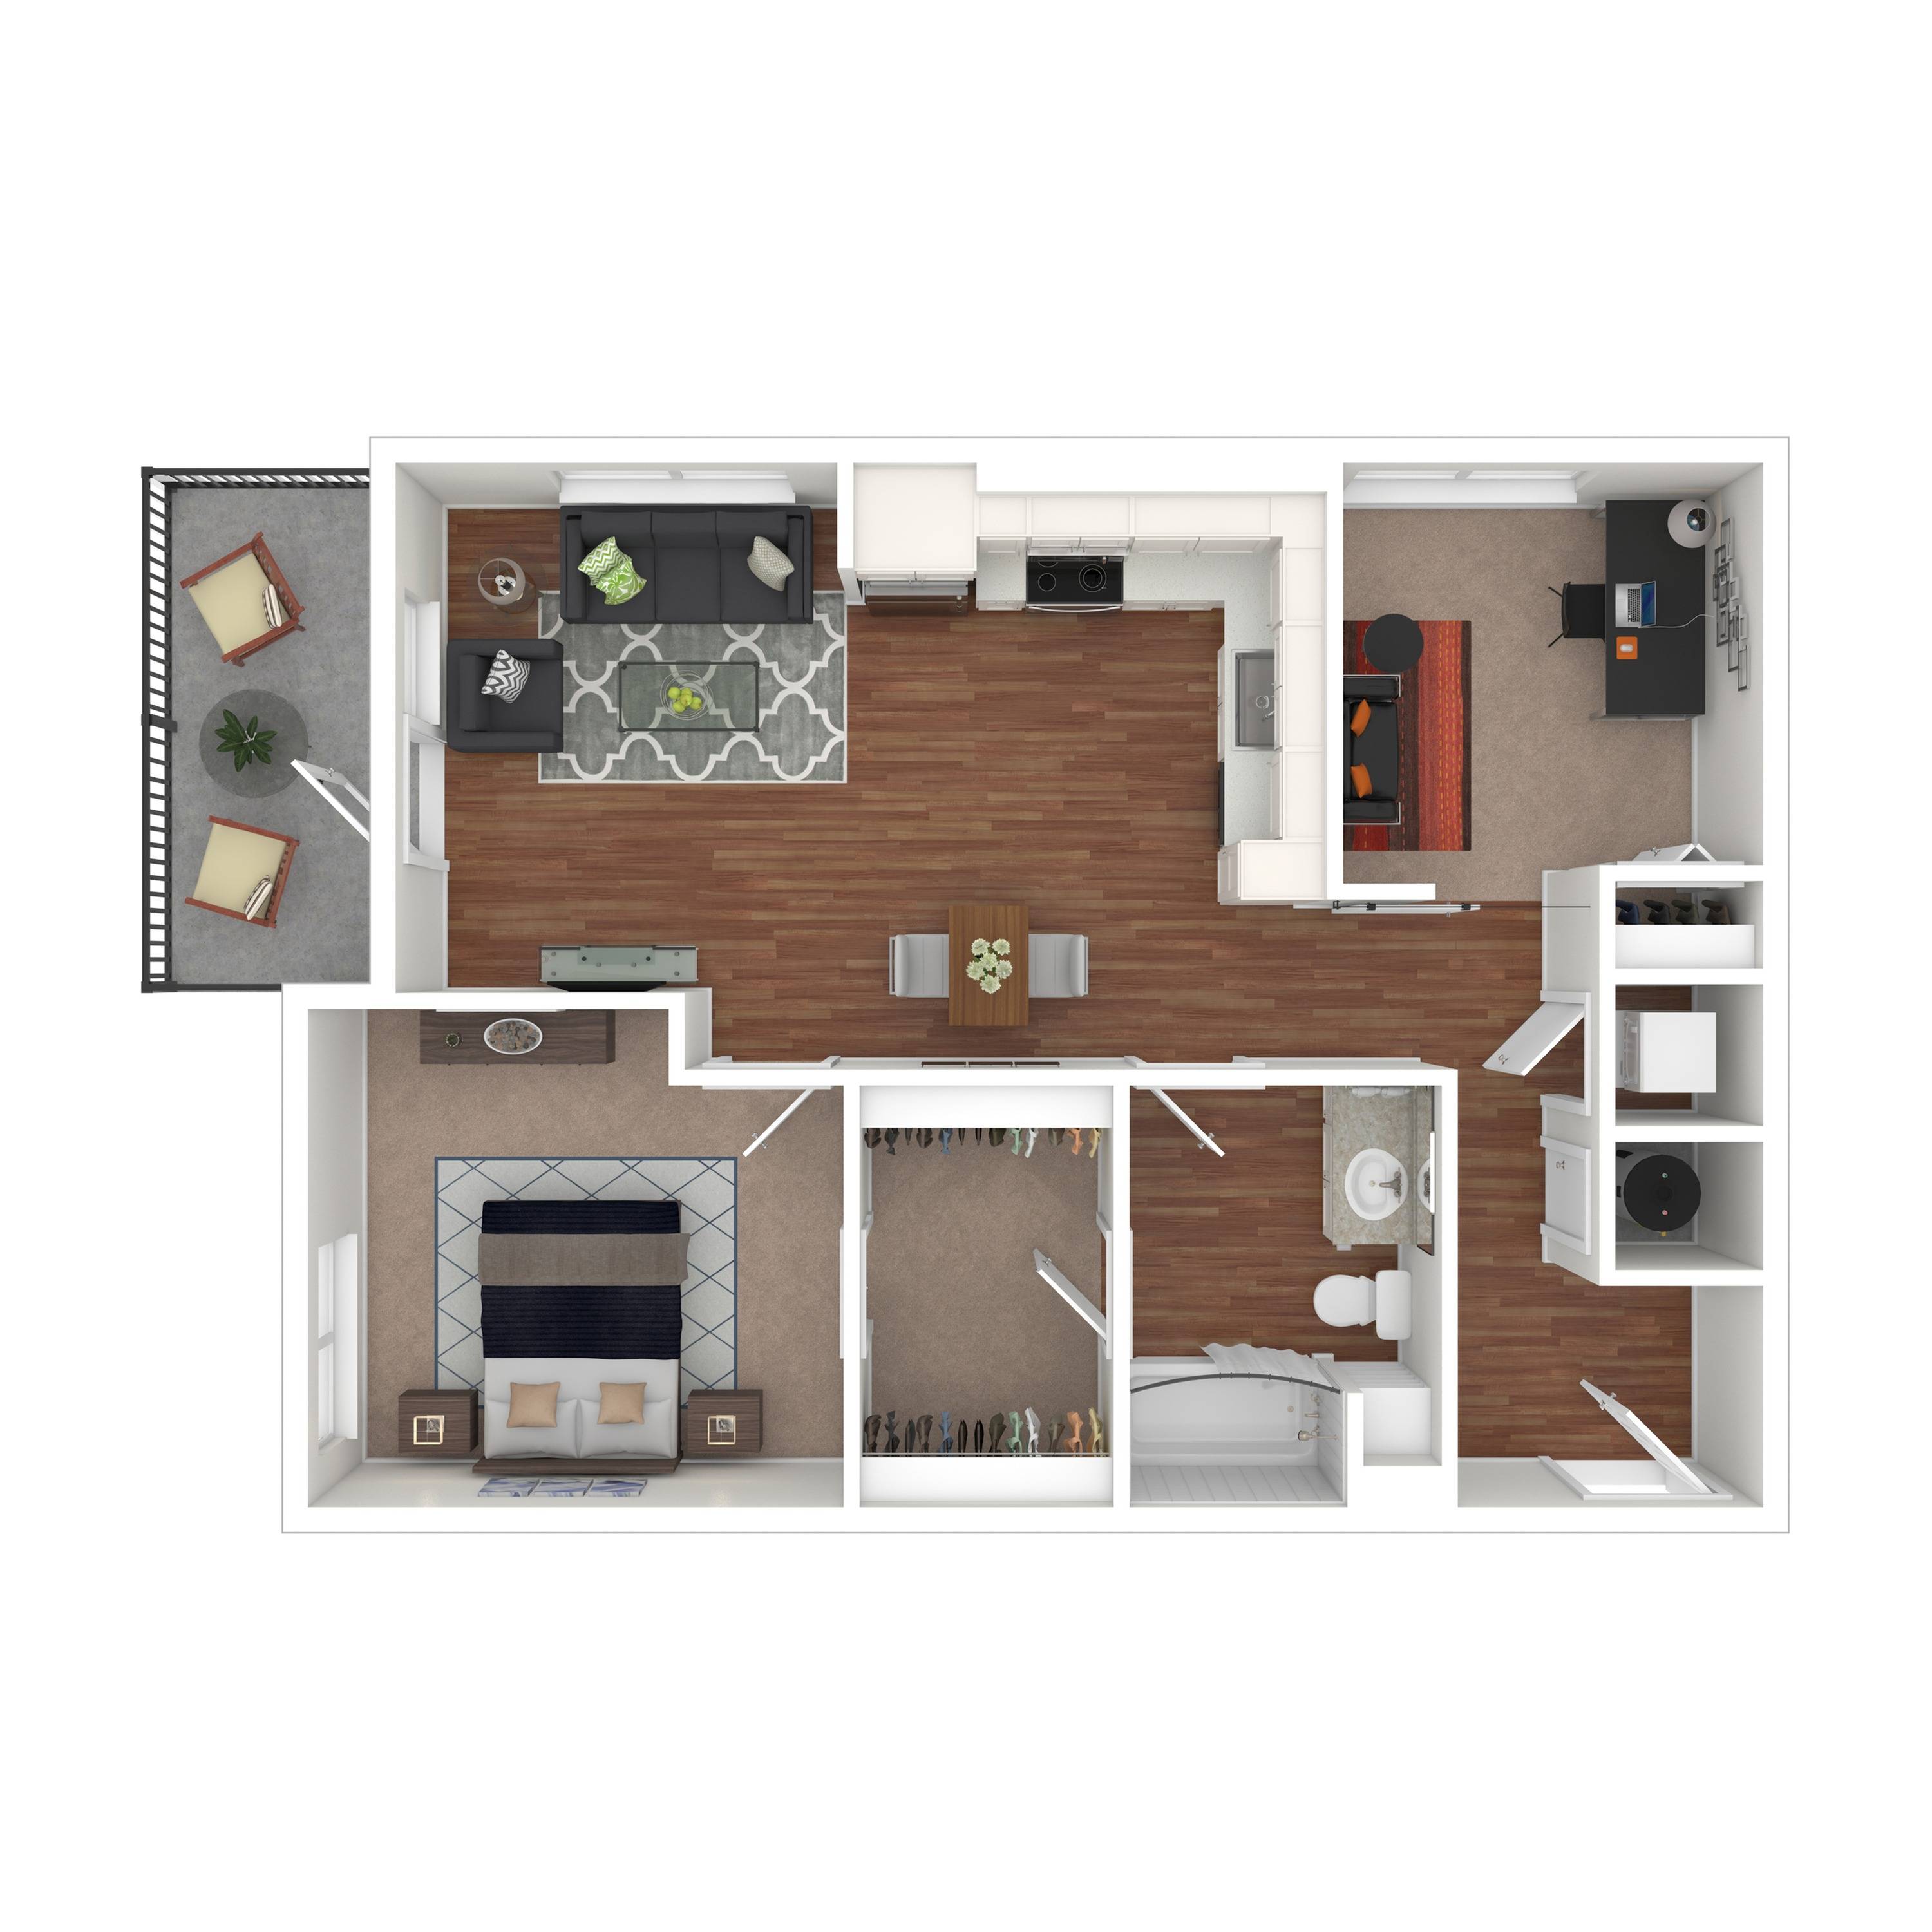 1 Bedroom Floor Plan | Apartments For Rent In Lacey Wa | Martingale